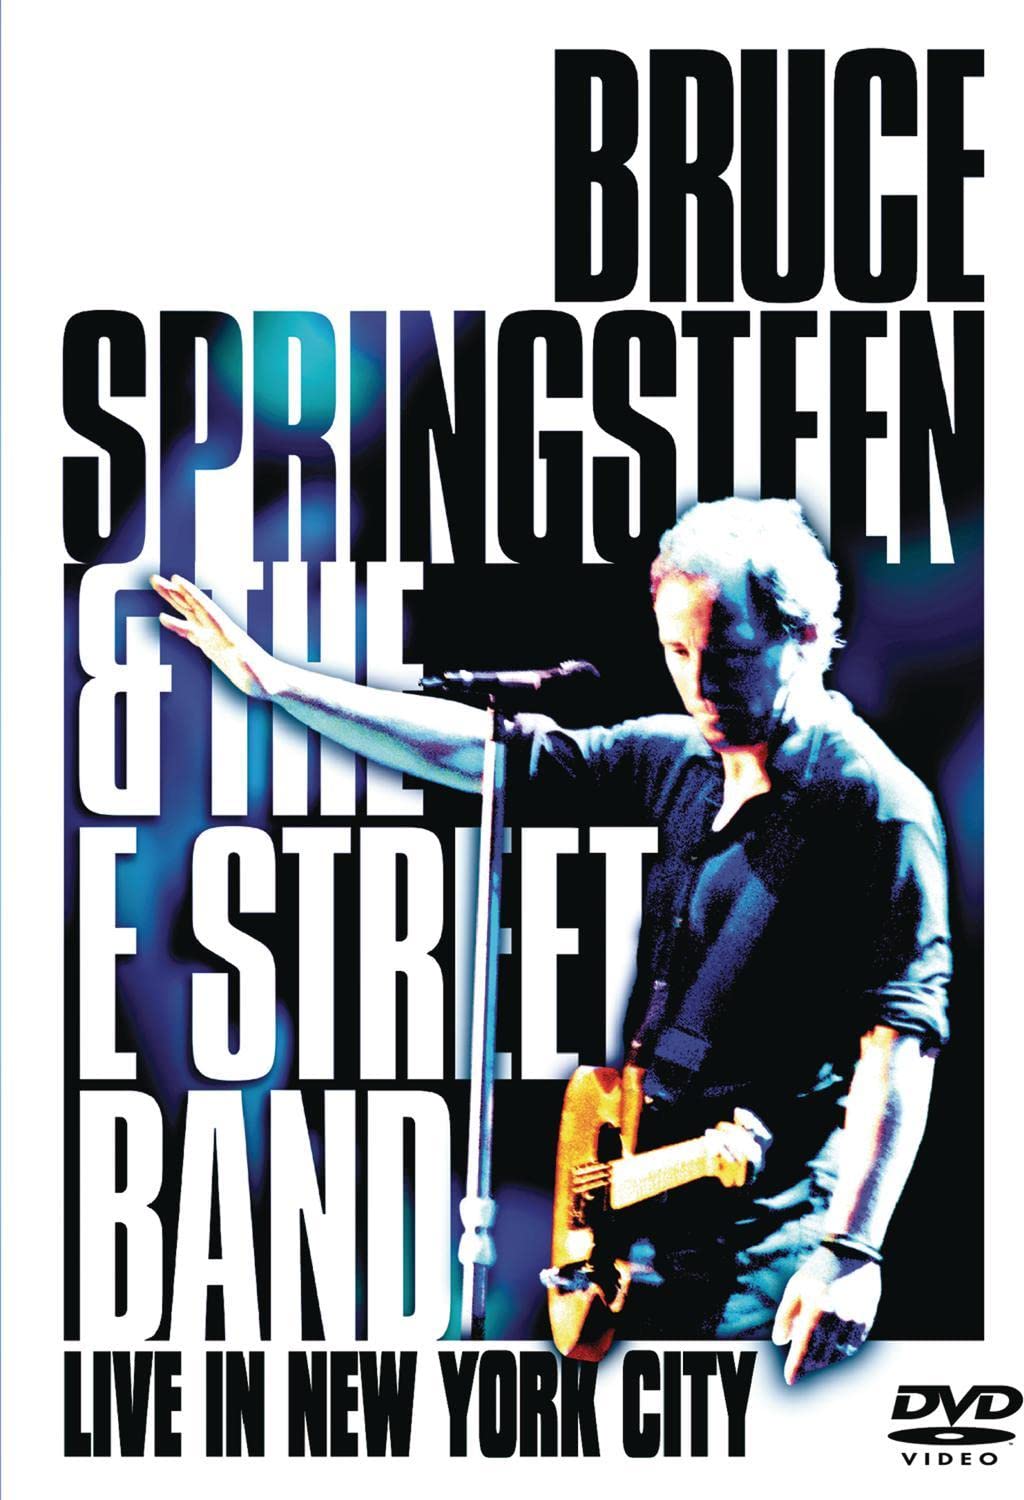 Bruce Springsteen Live in New York City (DVD) front cover